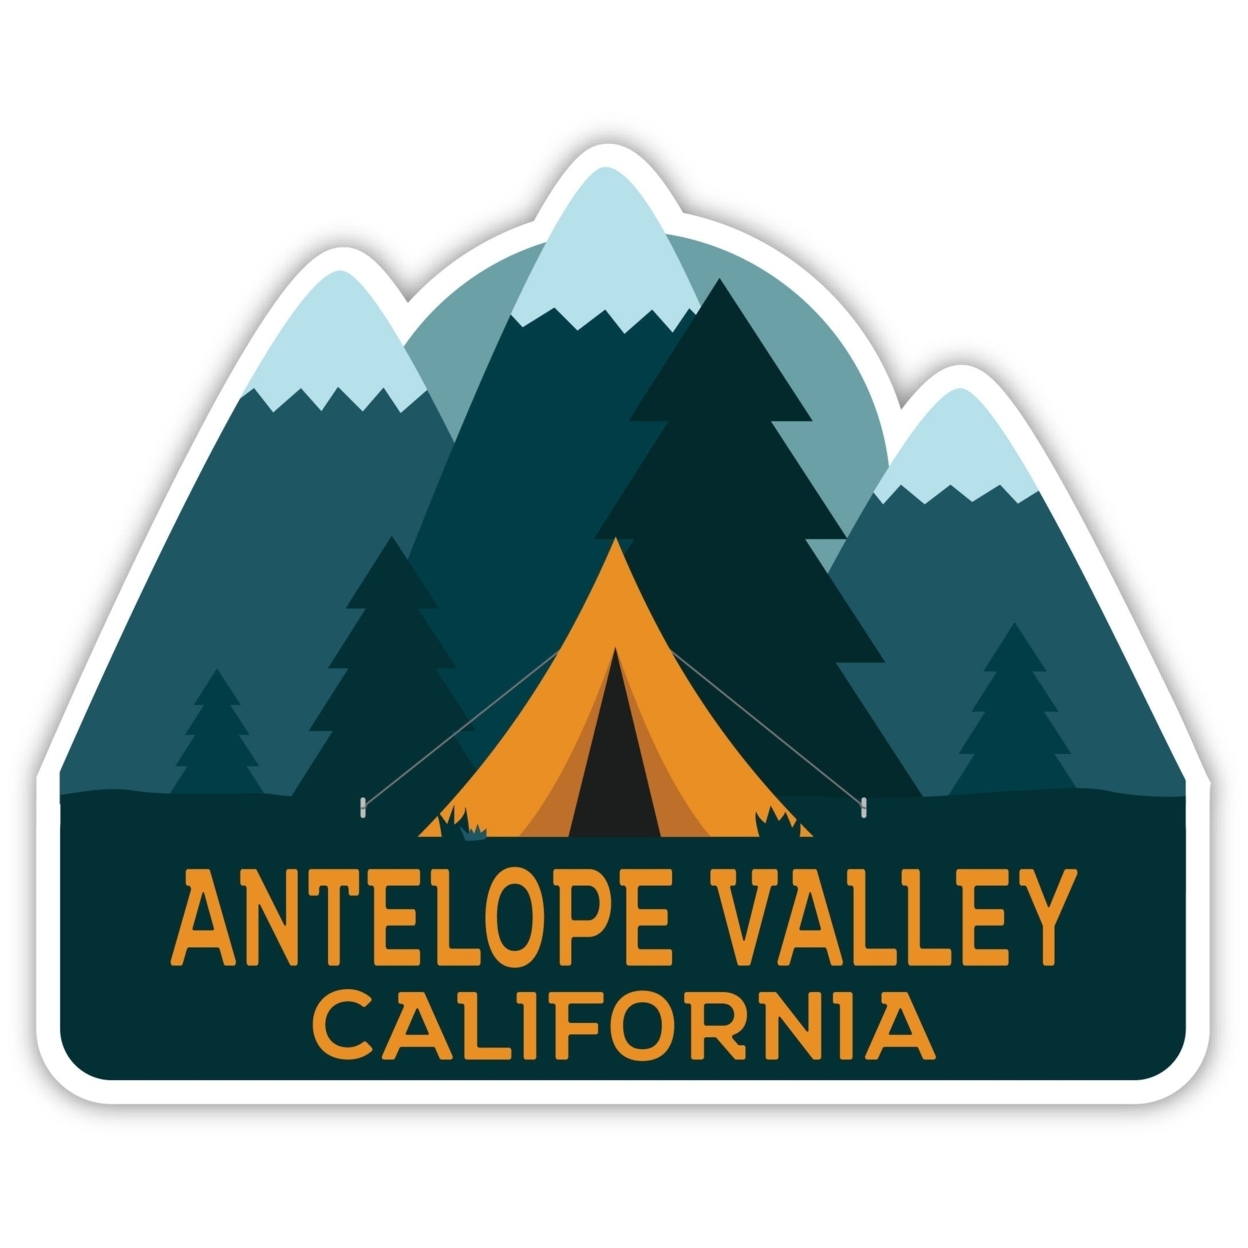 Antelope Valley California Souvenir Decorative Stickers (Choose Theme And Size) - 4-Pack, 4-Inch, Tent